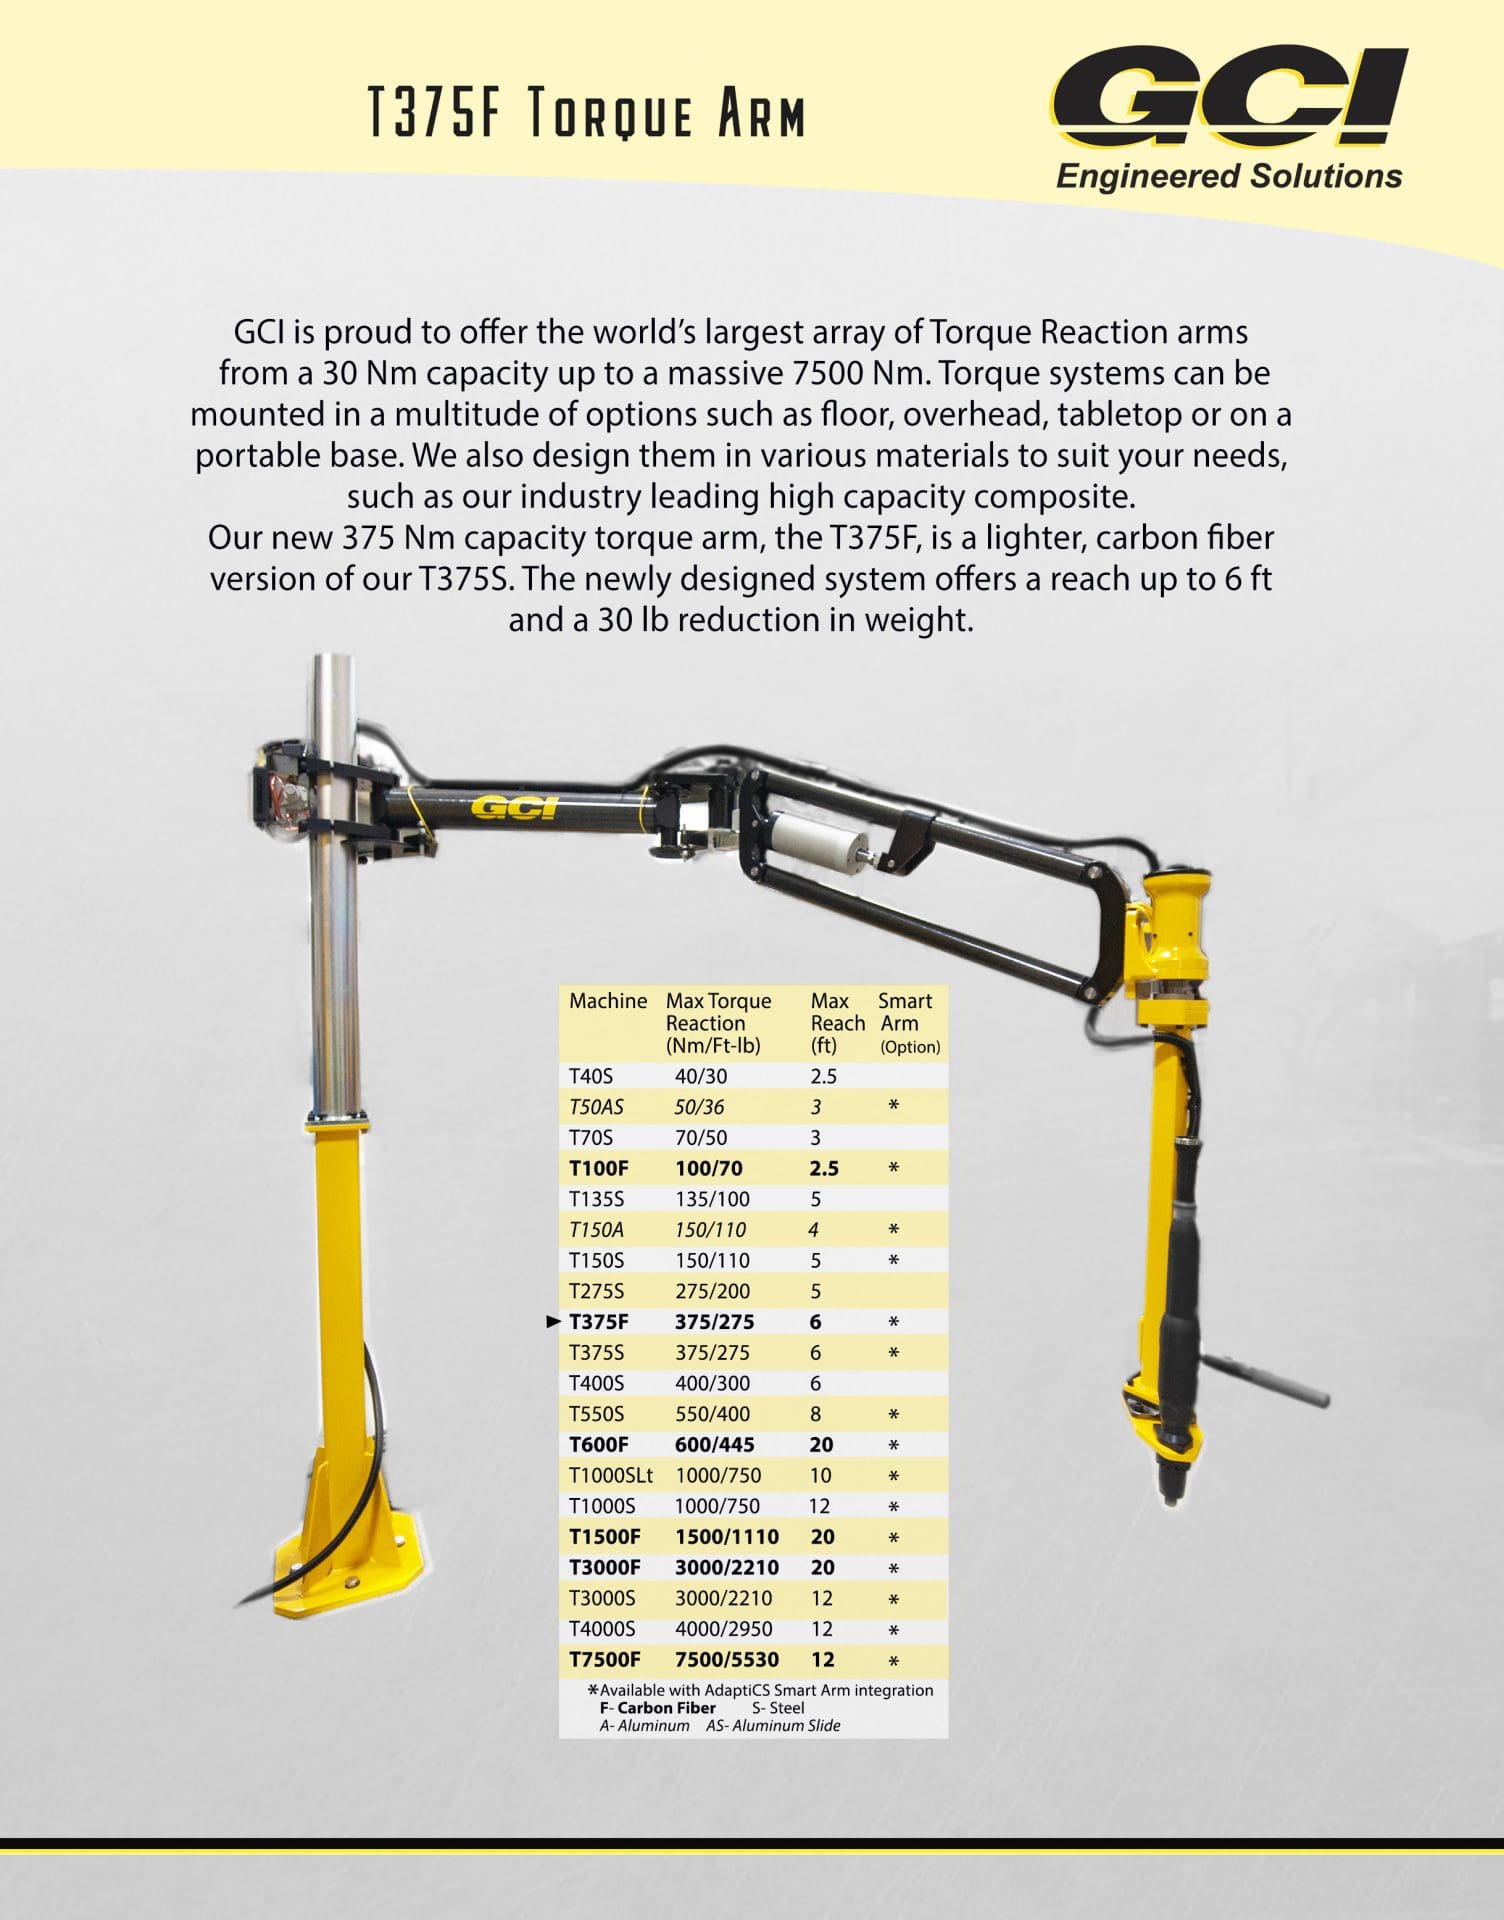 A brochure presenting GCIs carbon fiber torque arm, the T375F with 375 Nm of capacity.